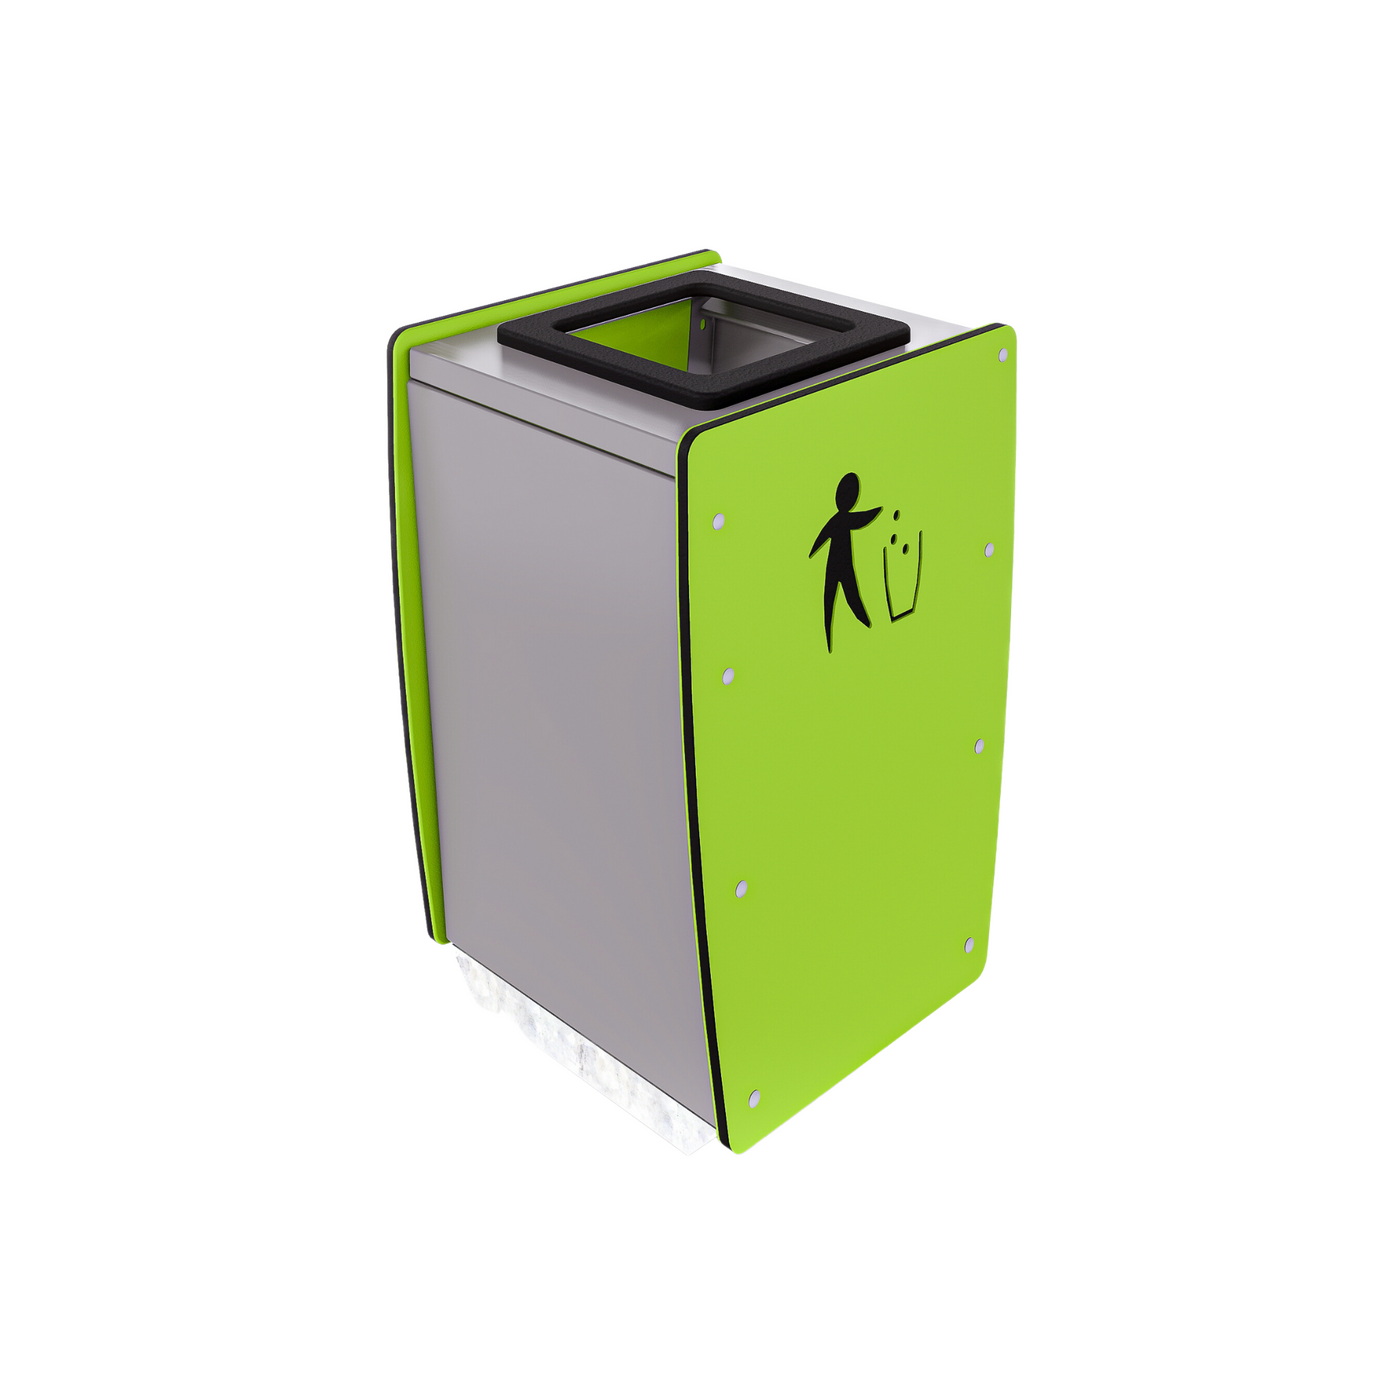 Open Jazz Waste Management Bin with one container